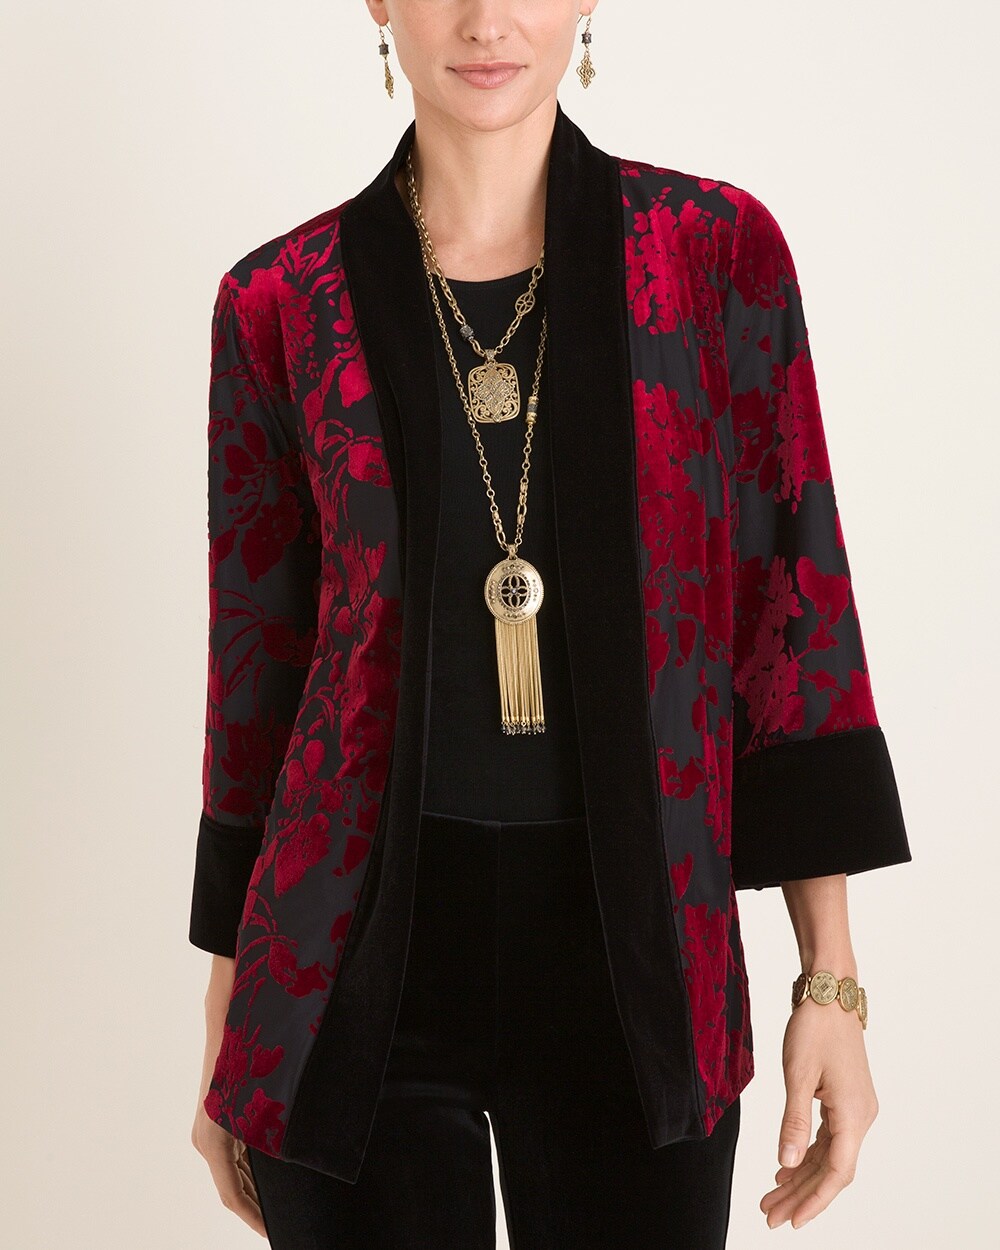 Travelers Collection Reversible Black to Red Velvet Jacket